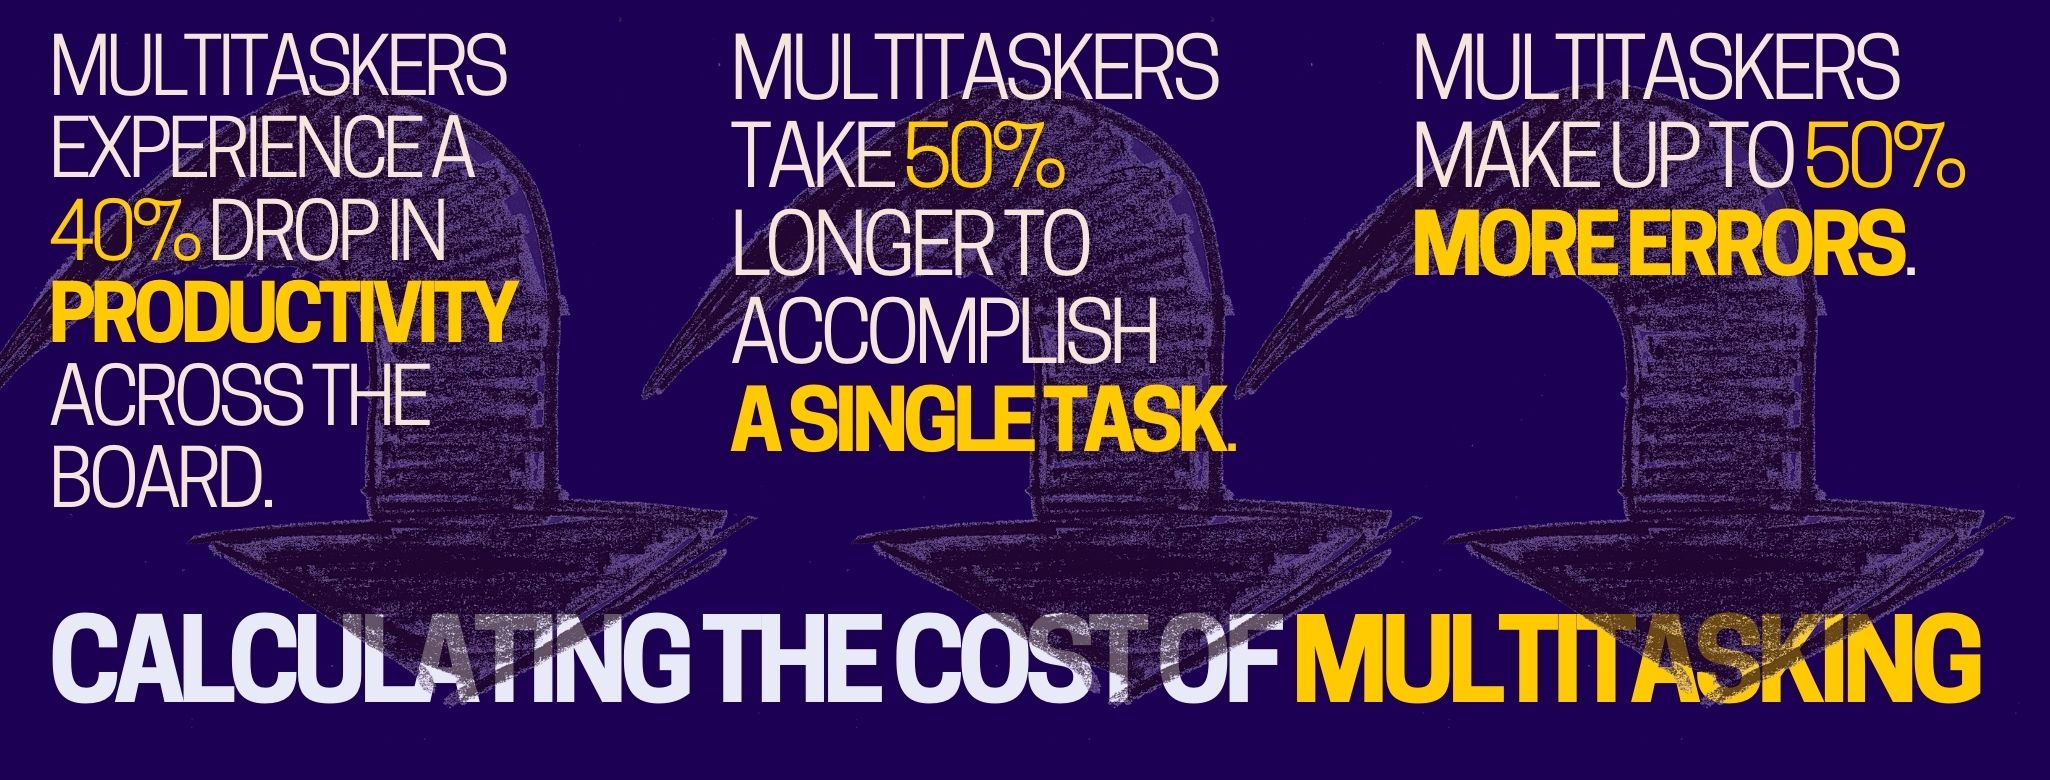 image: CALCULATING THE COST OF MULTITASKING. Multitaskers experience a 40% drop in productivity across the board. Multitaskers take 50% longer to accomplish a single task. Multitaskers make up to 50% more errors.